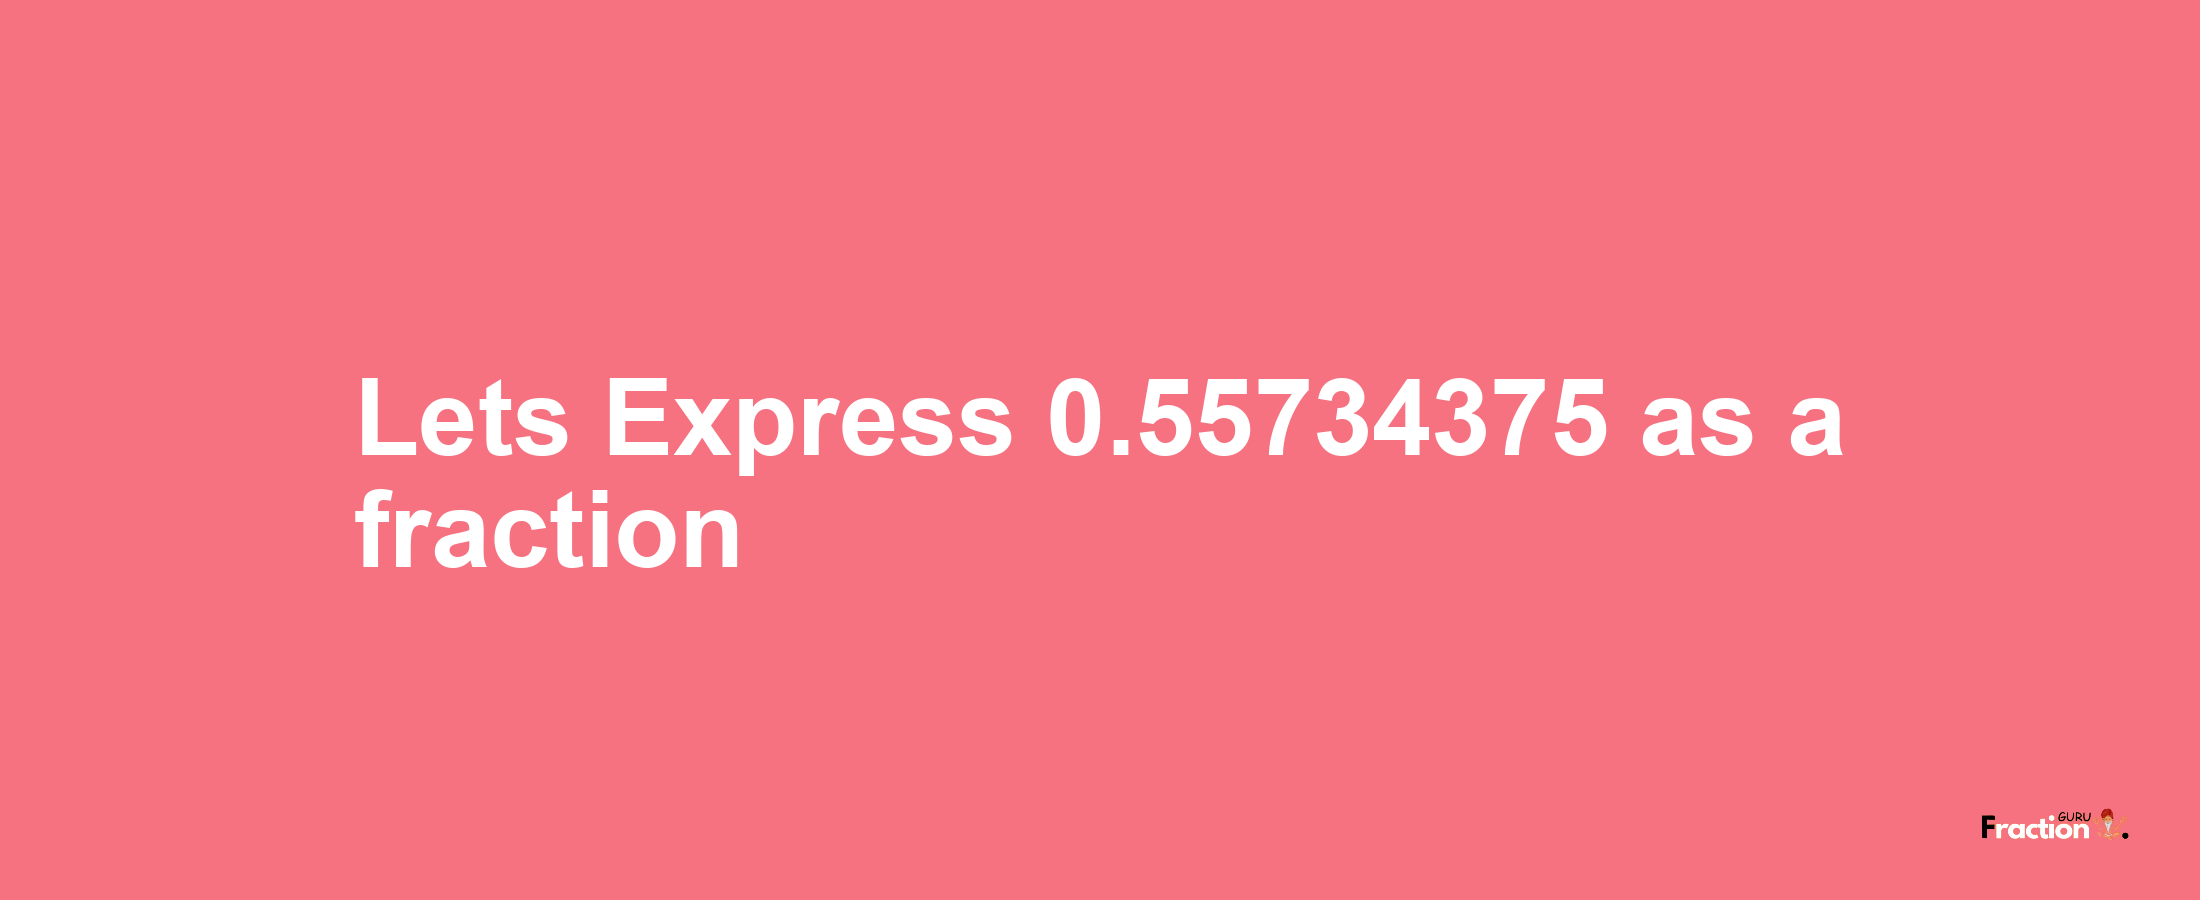 Lets Express 0.55734375 as afraction